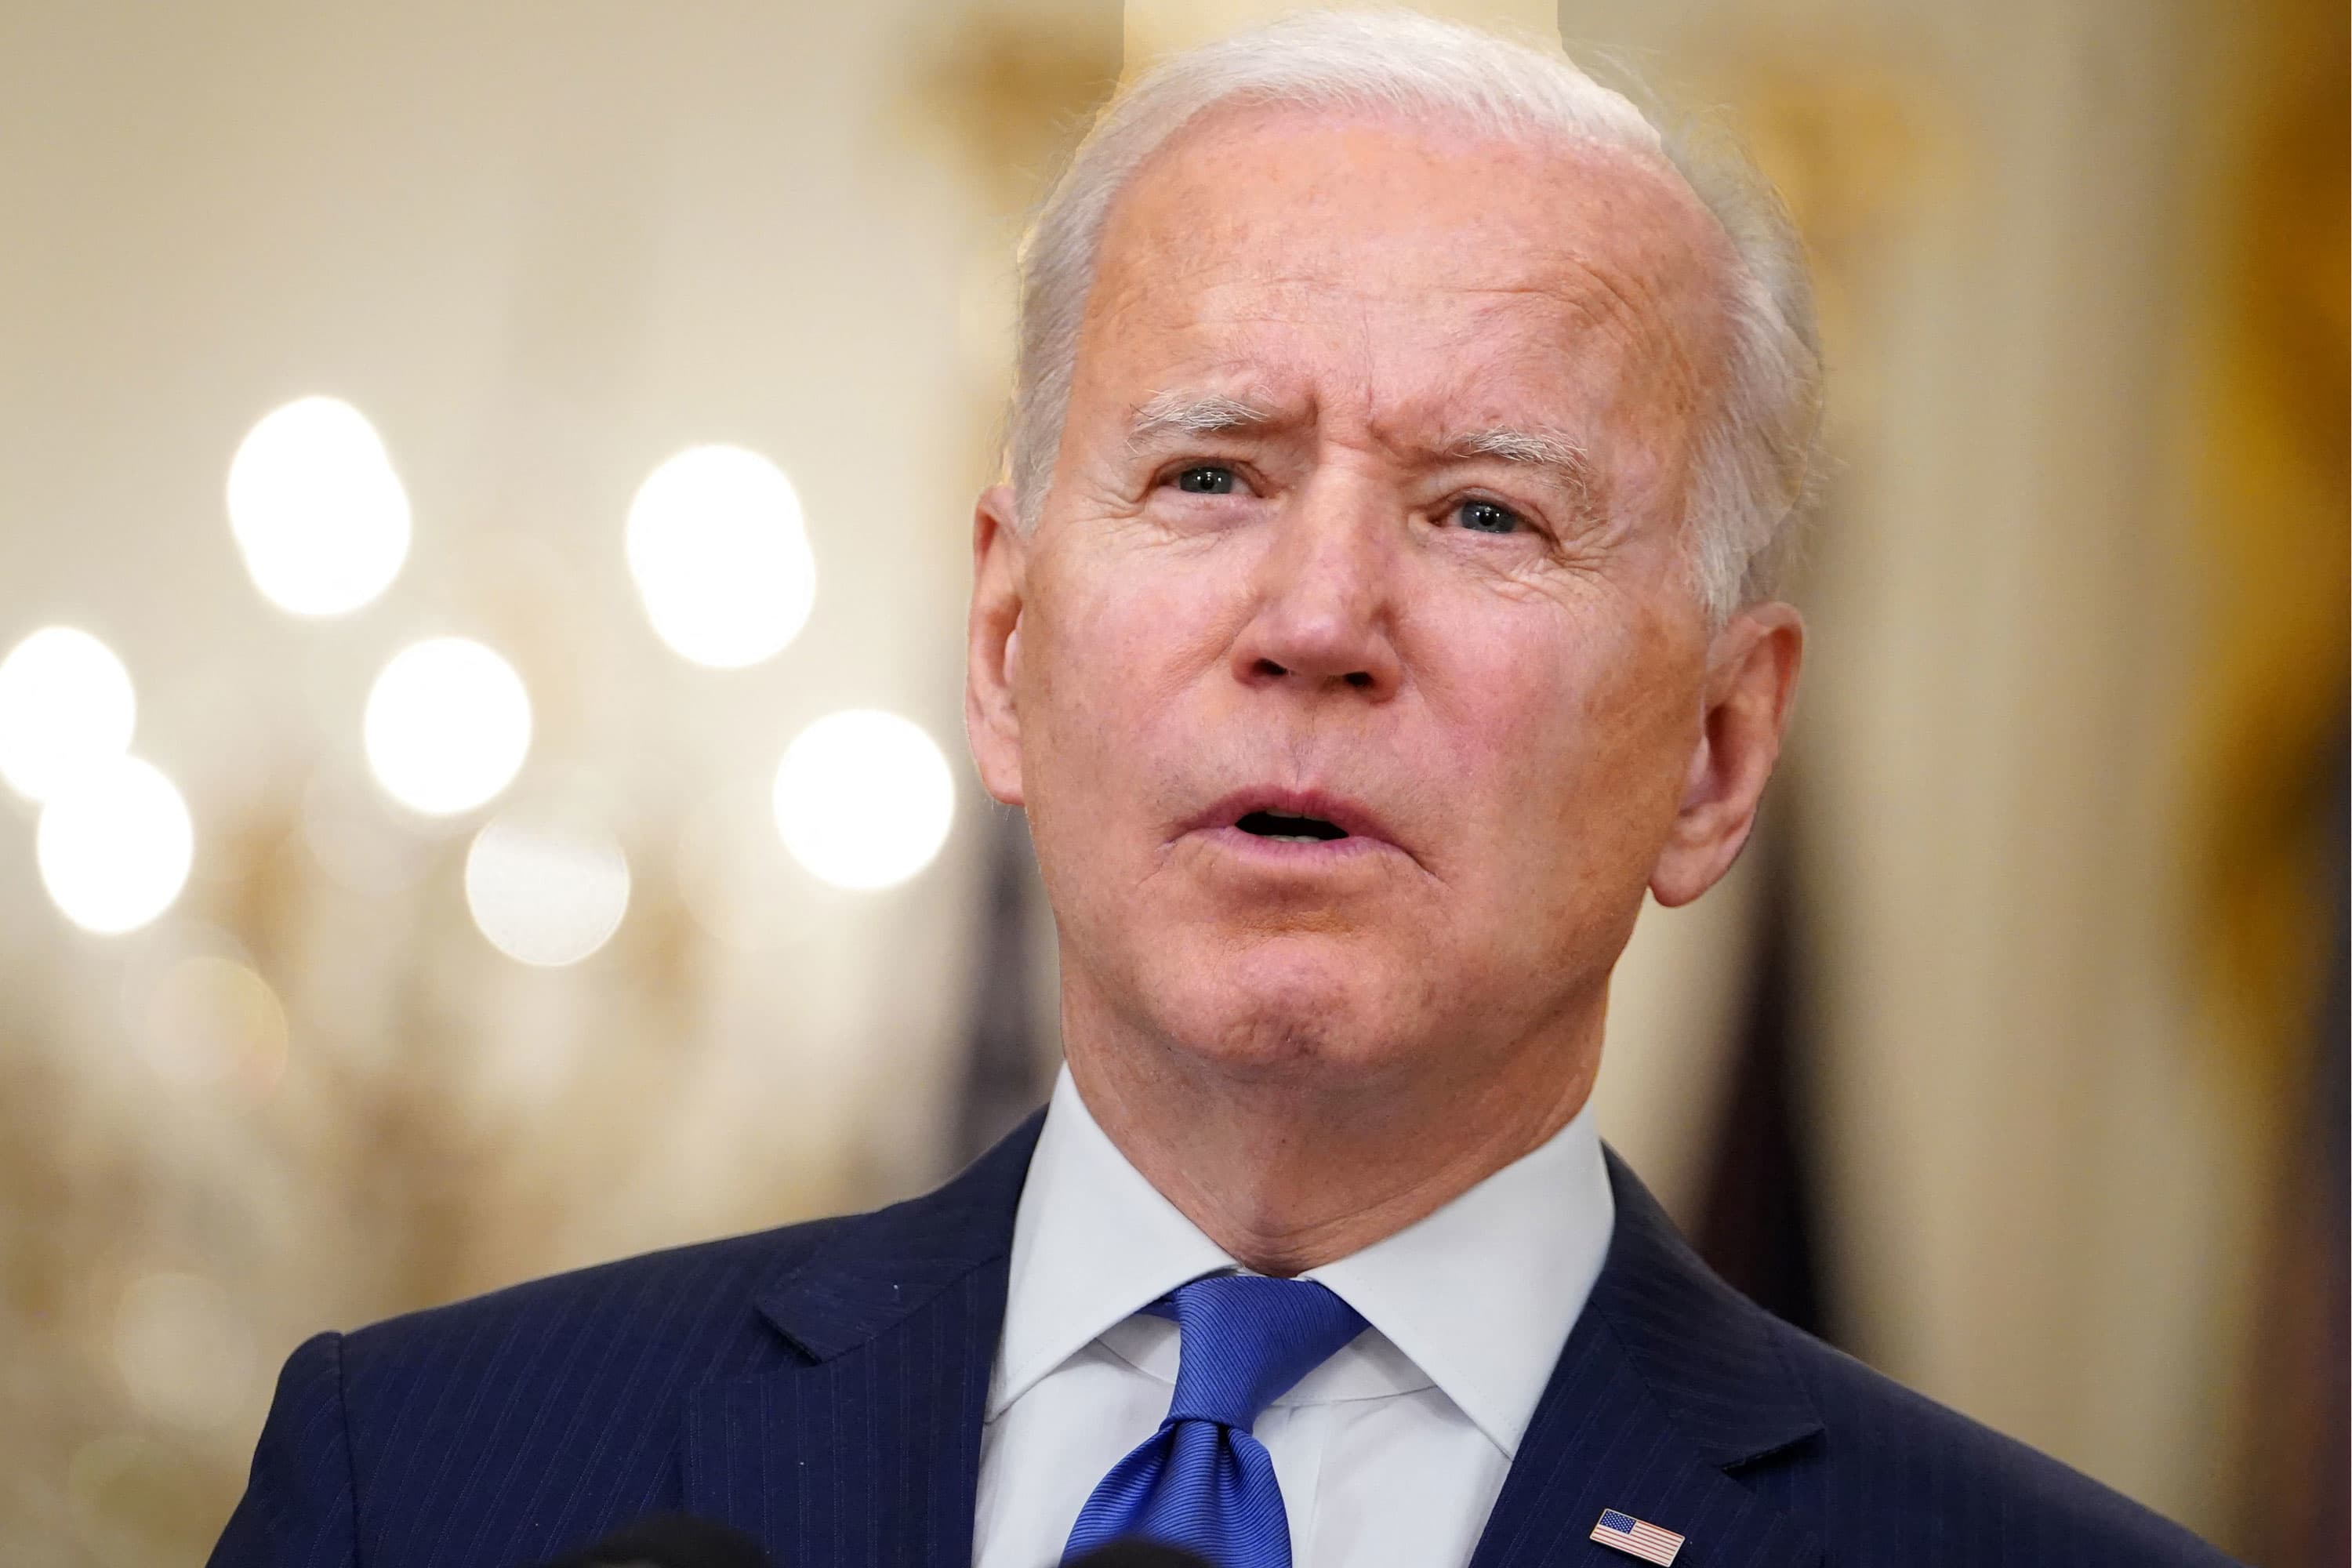 Biden charges the administration with the most prominent critics of Big Tech